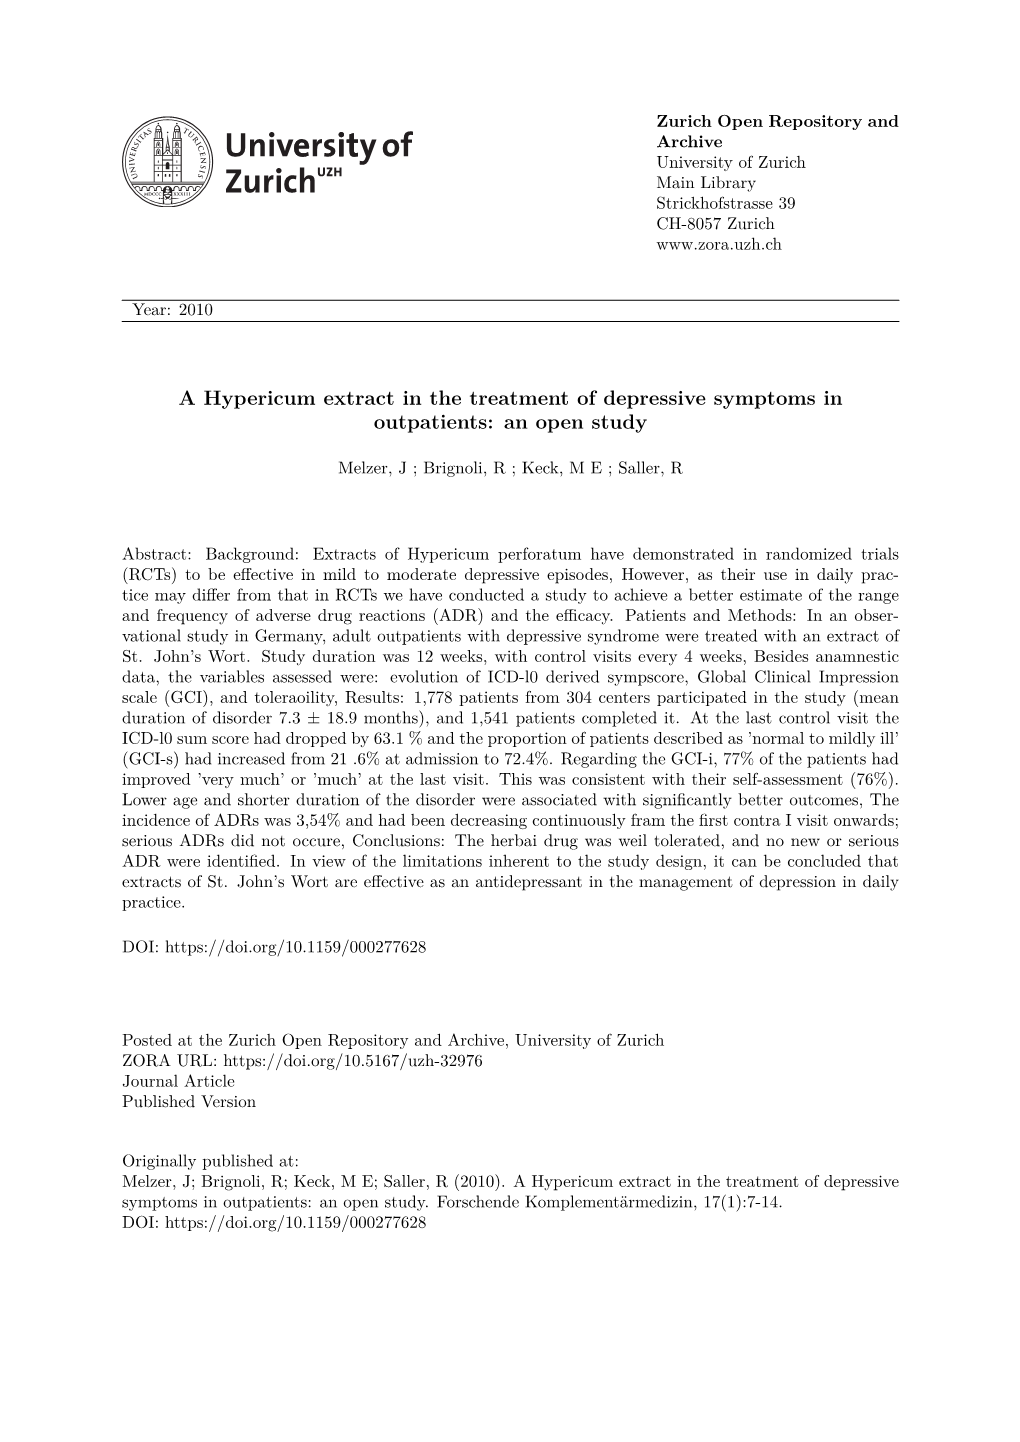 A Hypericum Extract in the Treatment of Depressive Symptoms in Outpatients: an Open Study